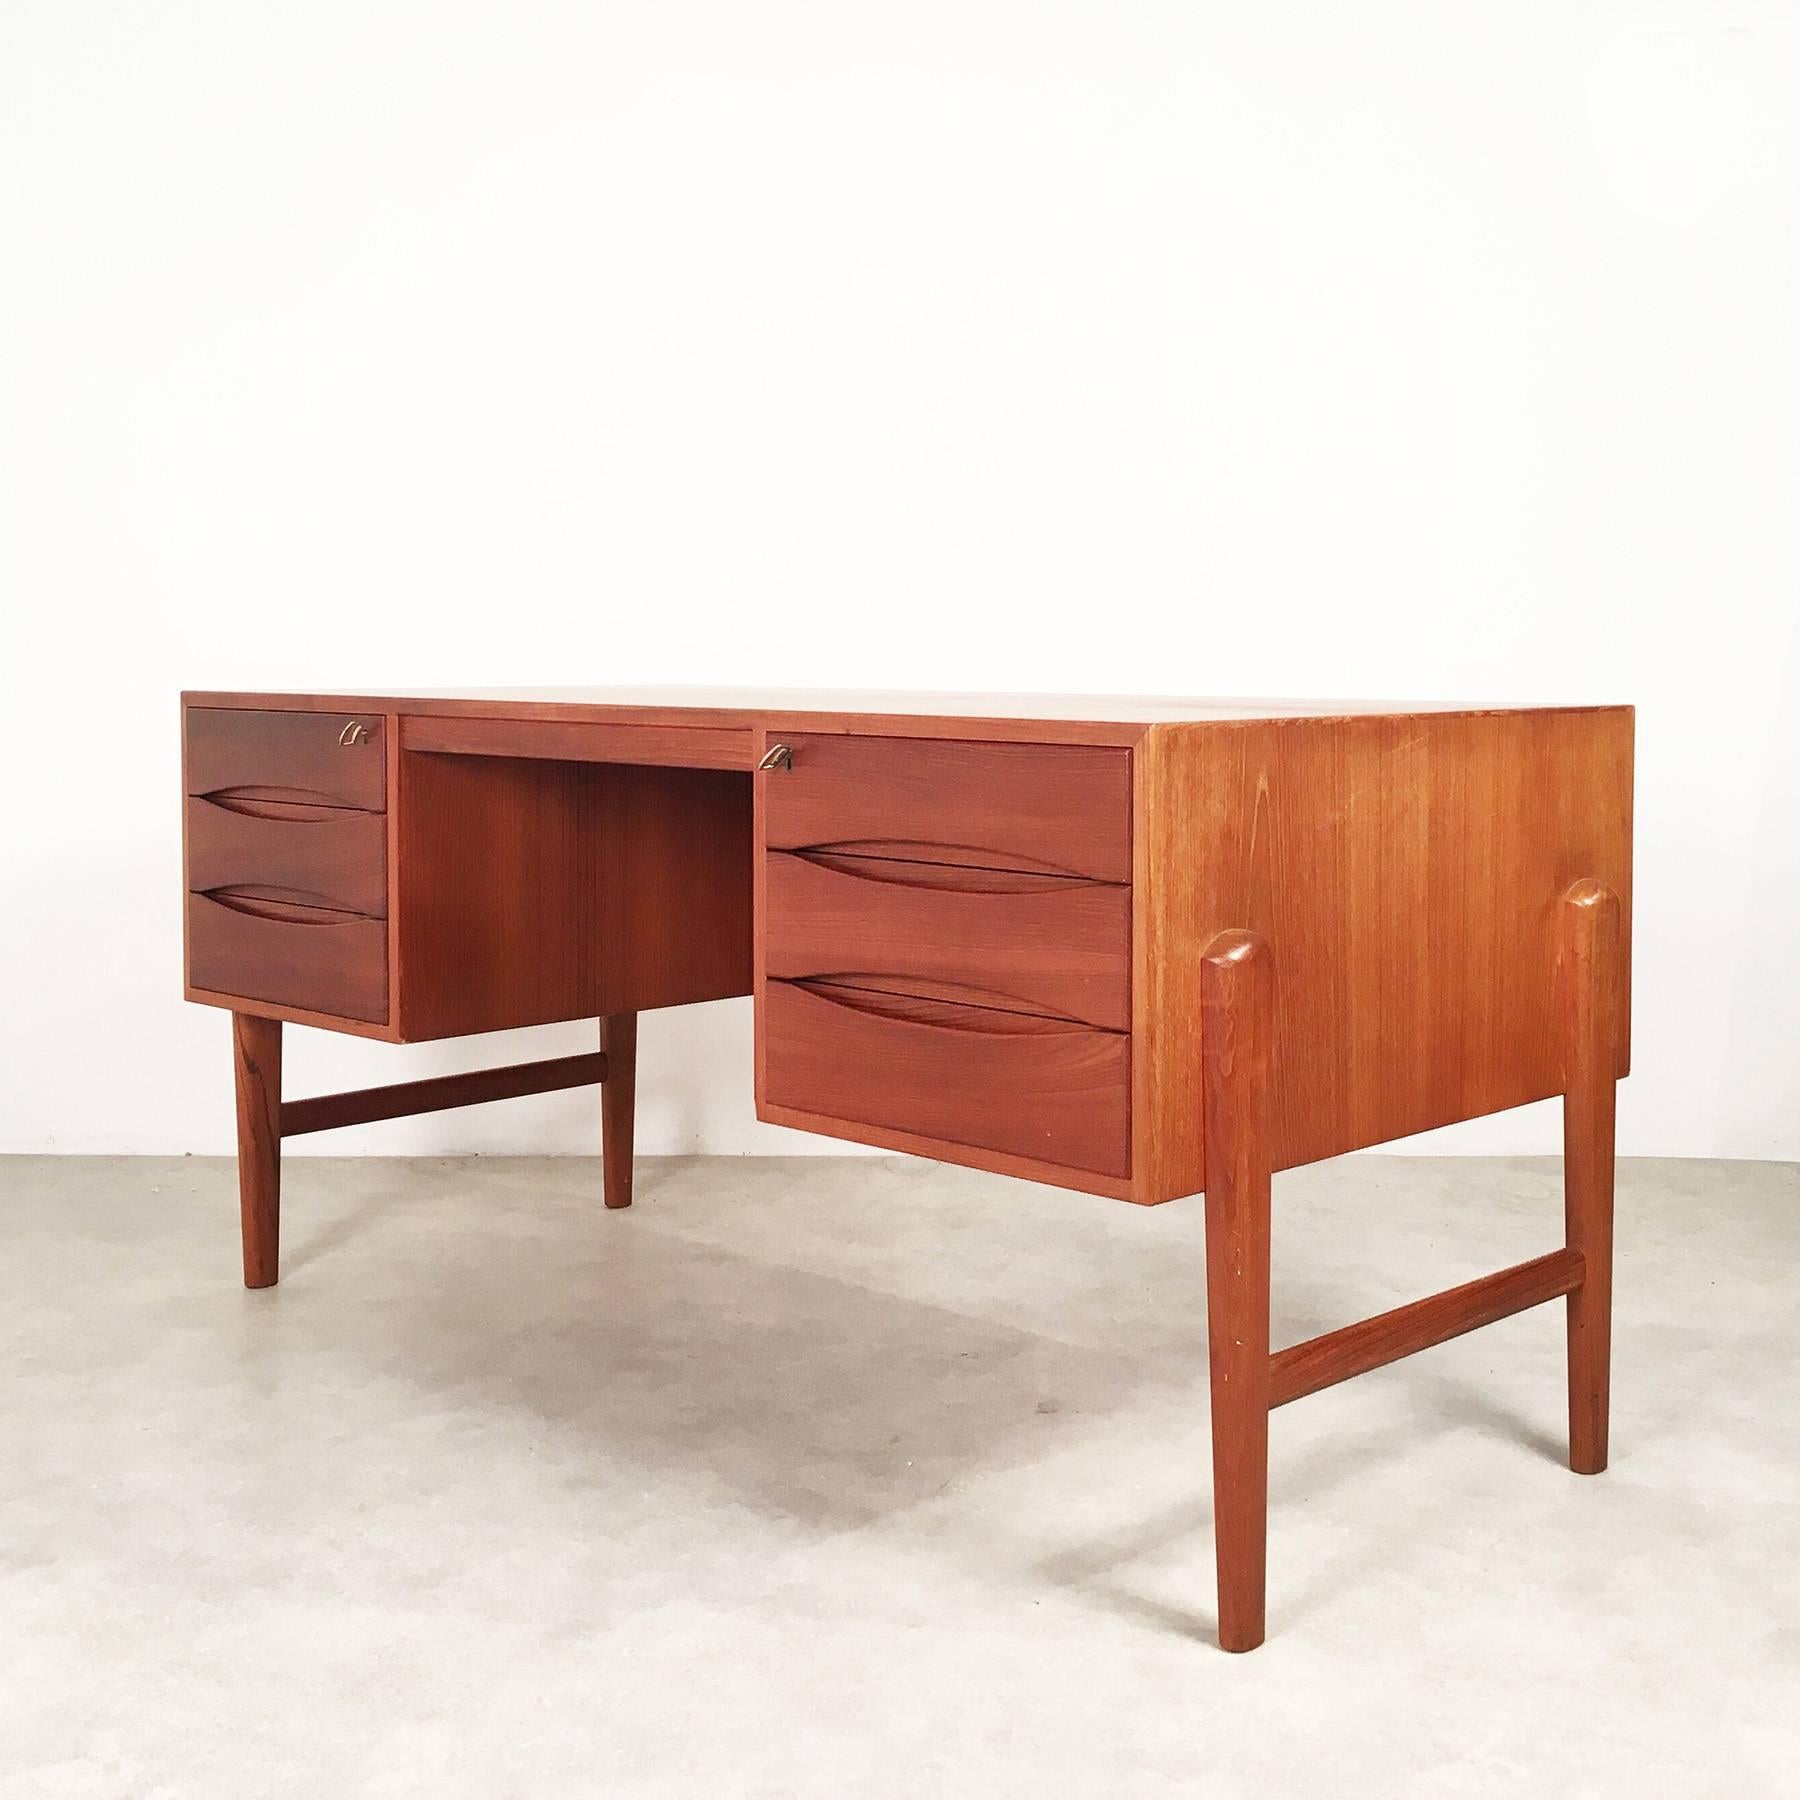 Danish teak writing desk, designed and manufactured in the 1960s. The desk is featured in the 1962 catalogue of Johannes Aasbjerg. Unfortunately, the designer is not stated. Rare model, very well crafted!